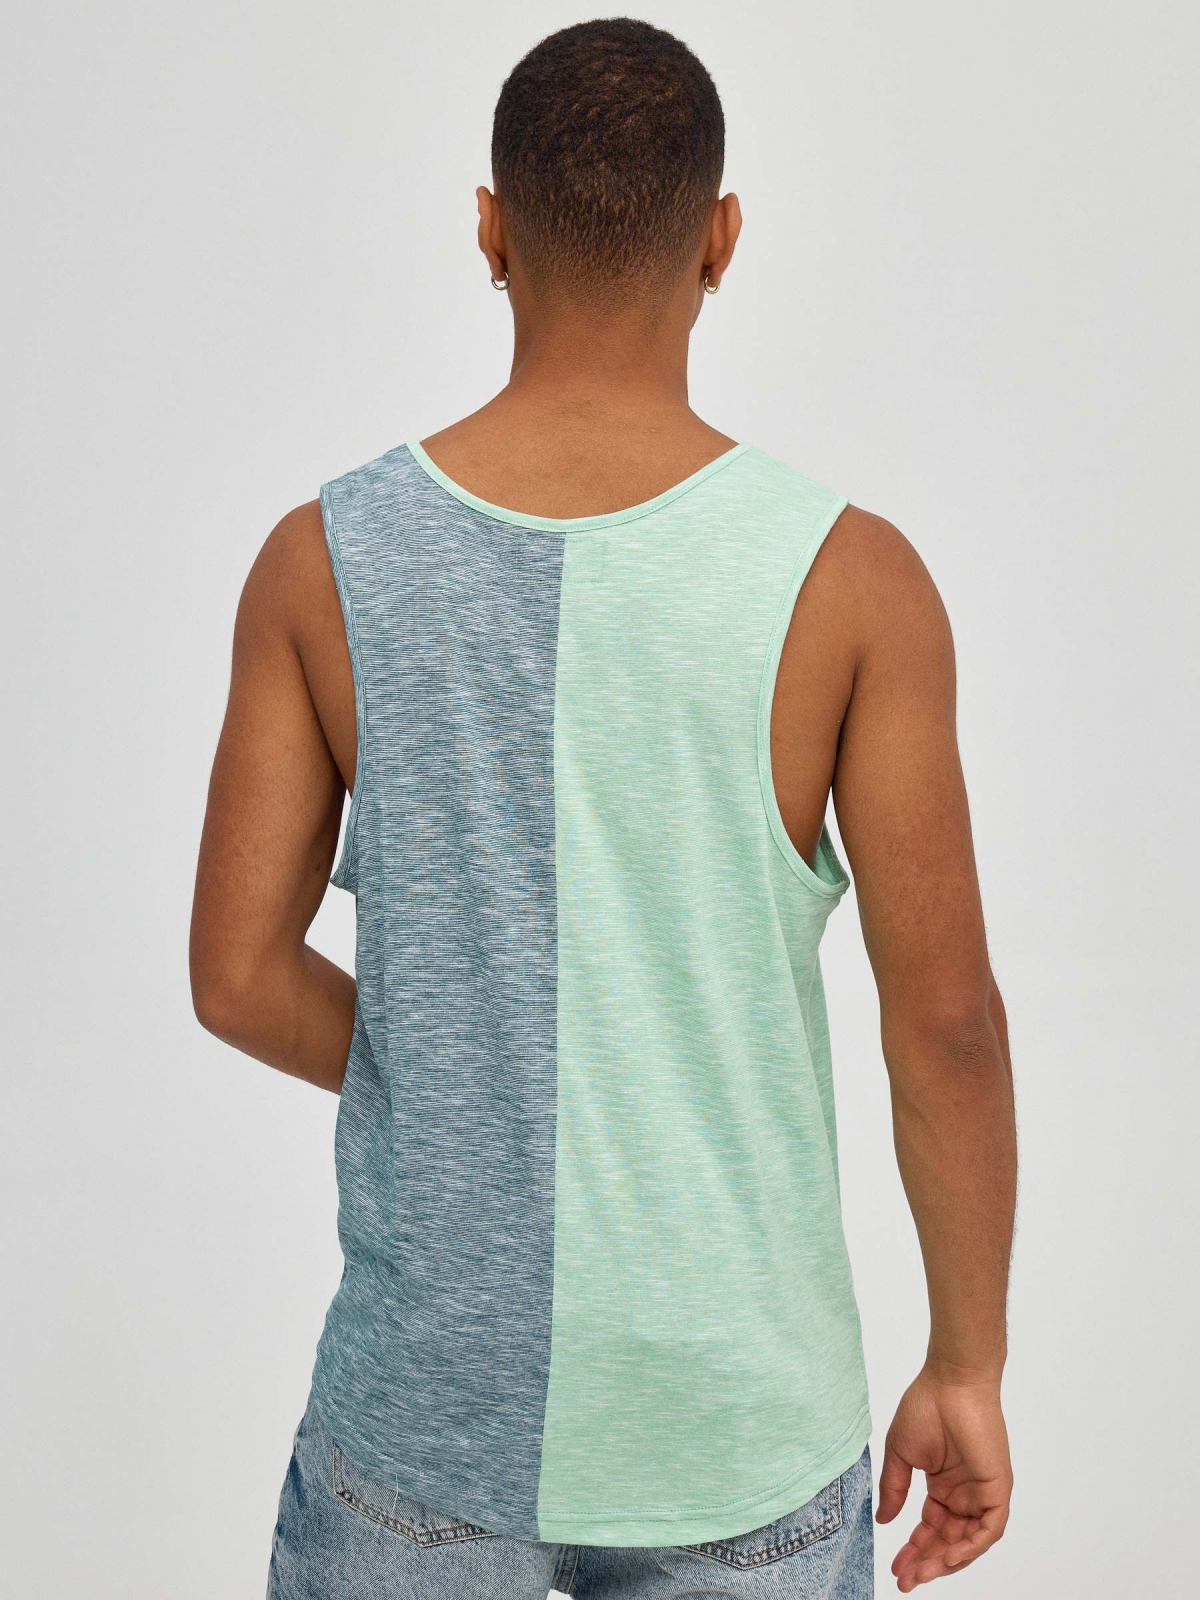 Camiseta TECH220 mint middle back view